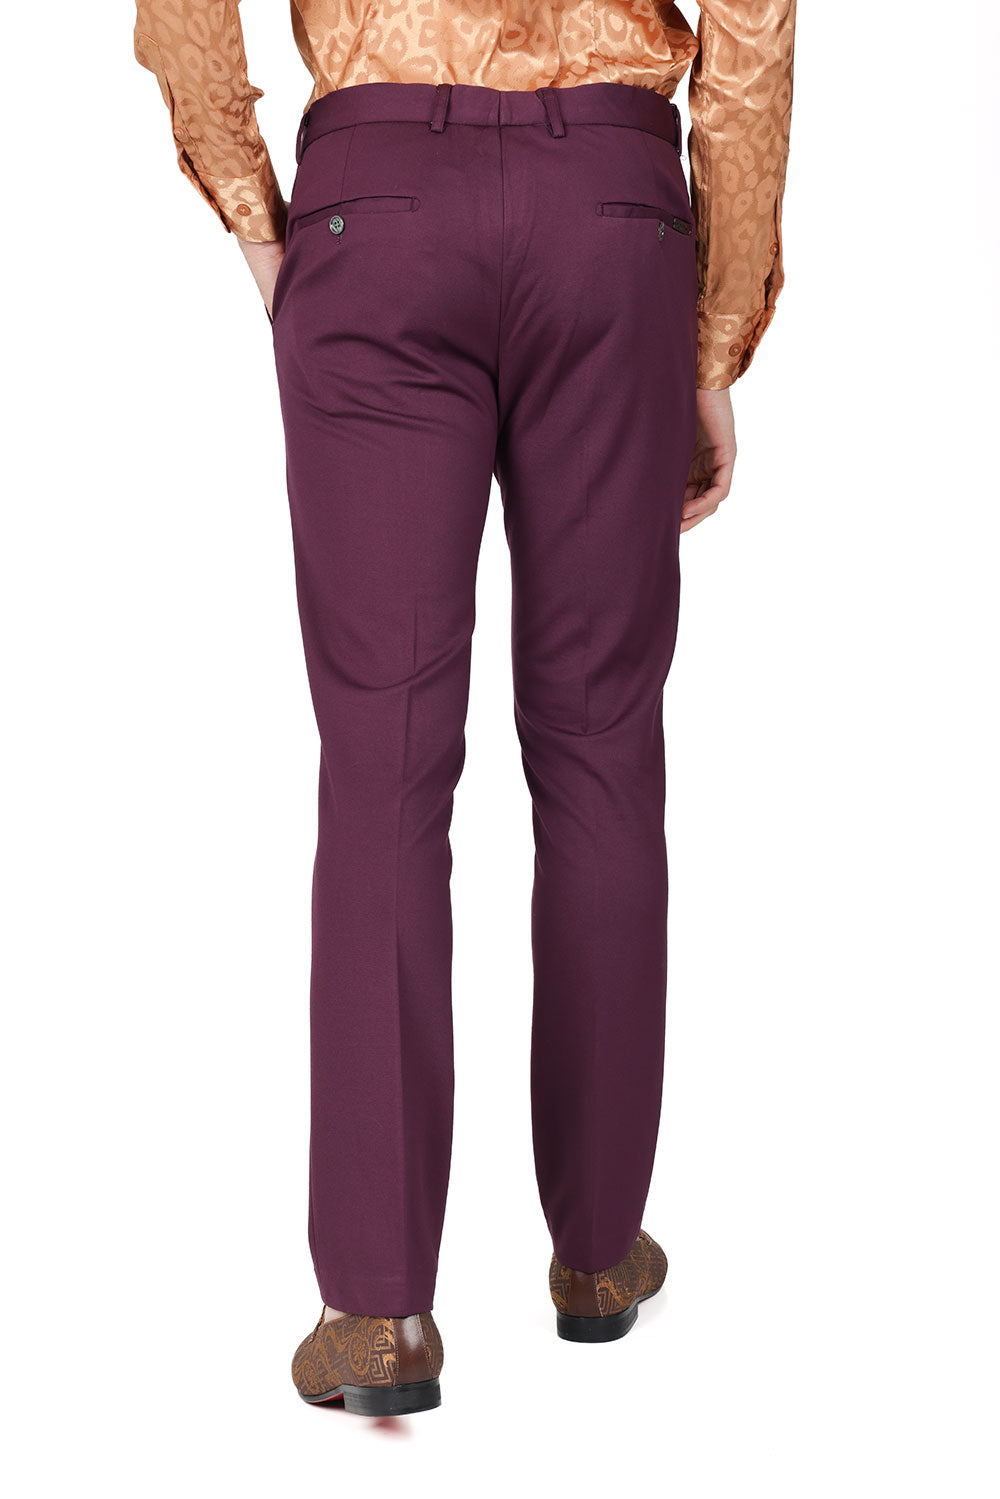 Barabas Men's Solid Color Essential Chino Dress Stretch Pants CP4007 Plum